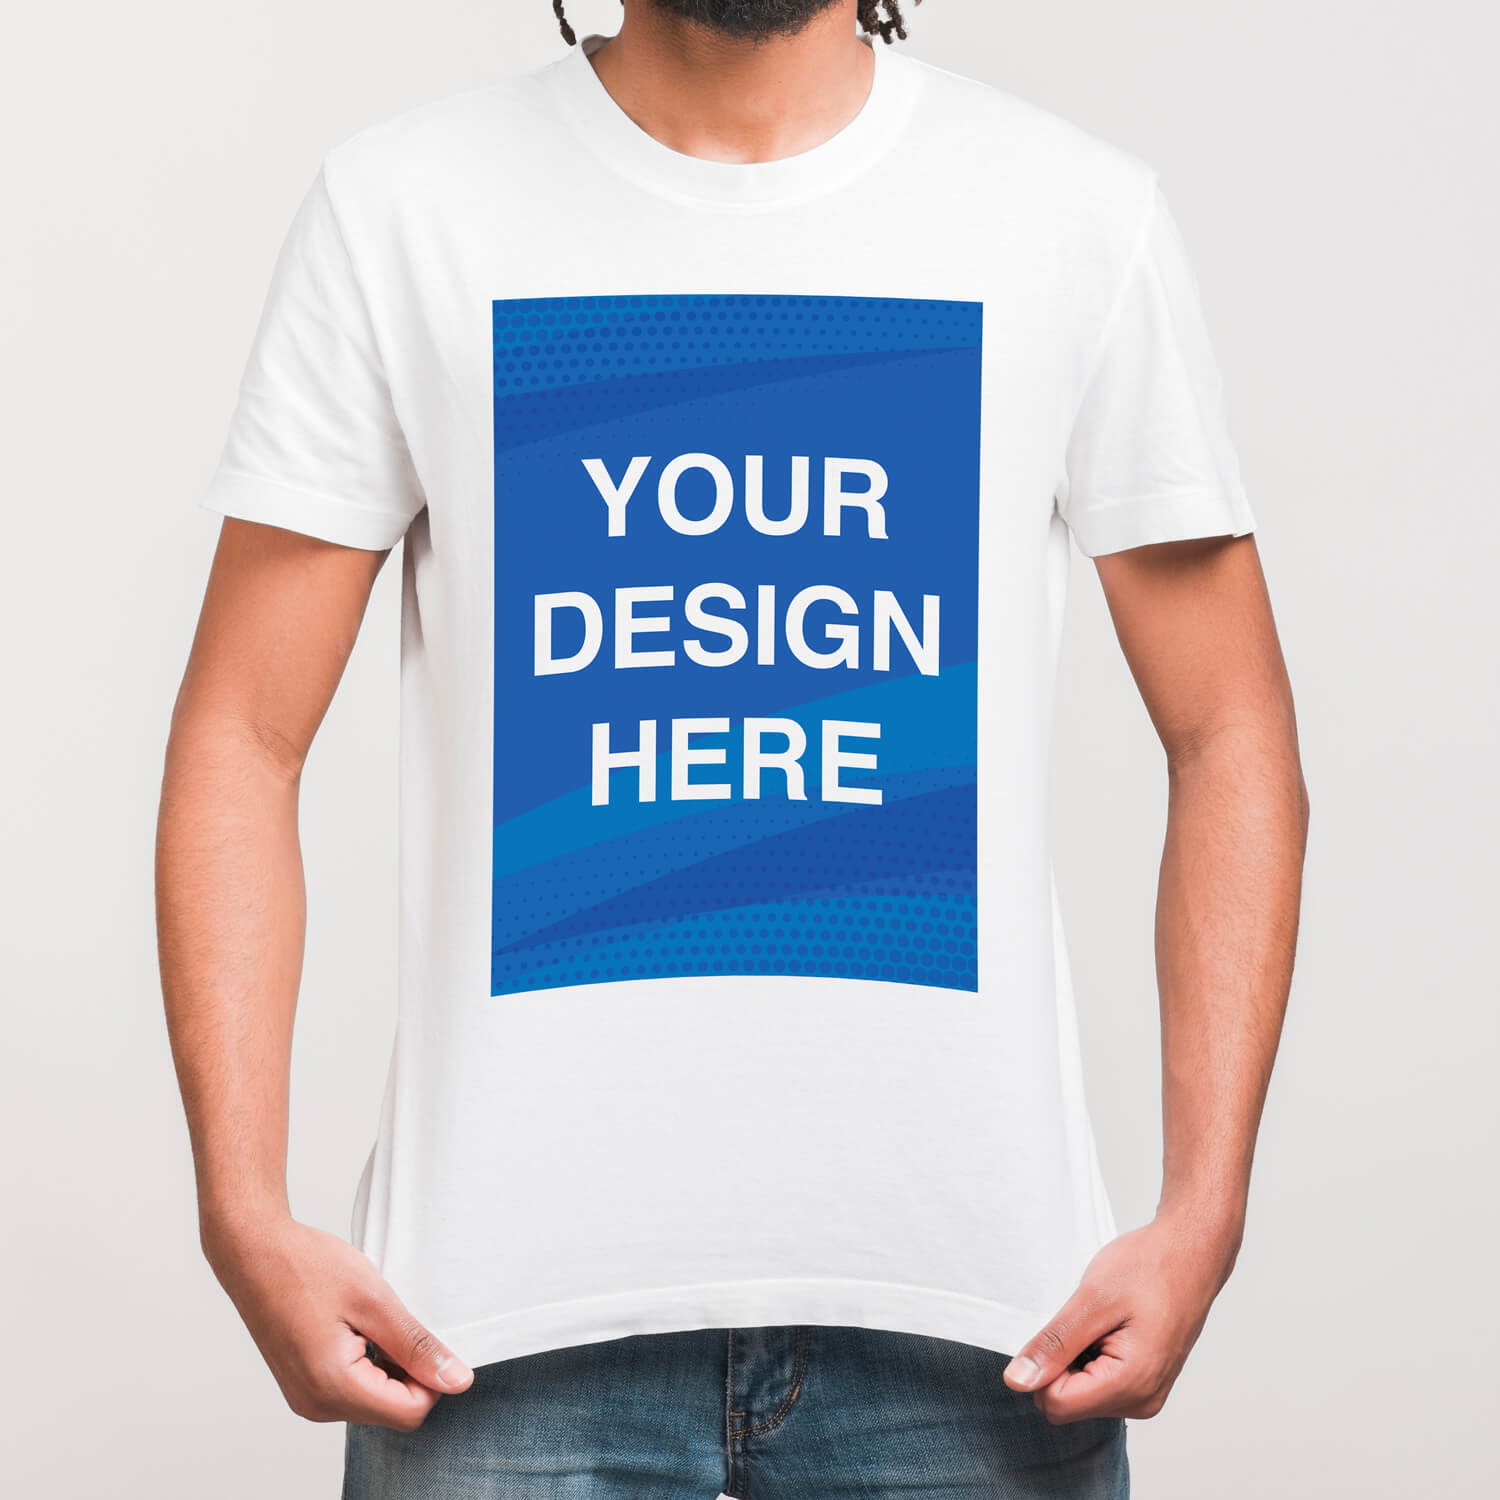 There are several common placement locations on a print on demand shirt.